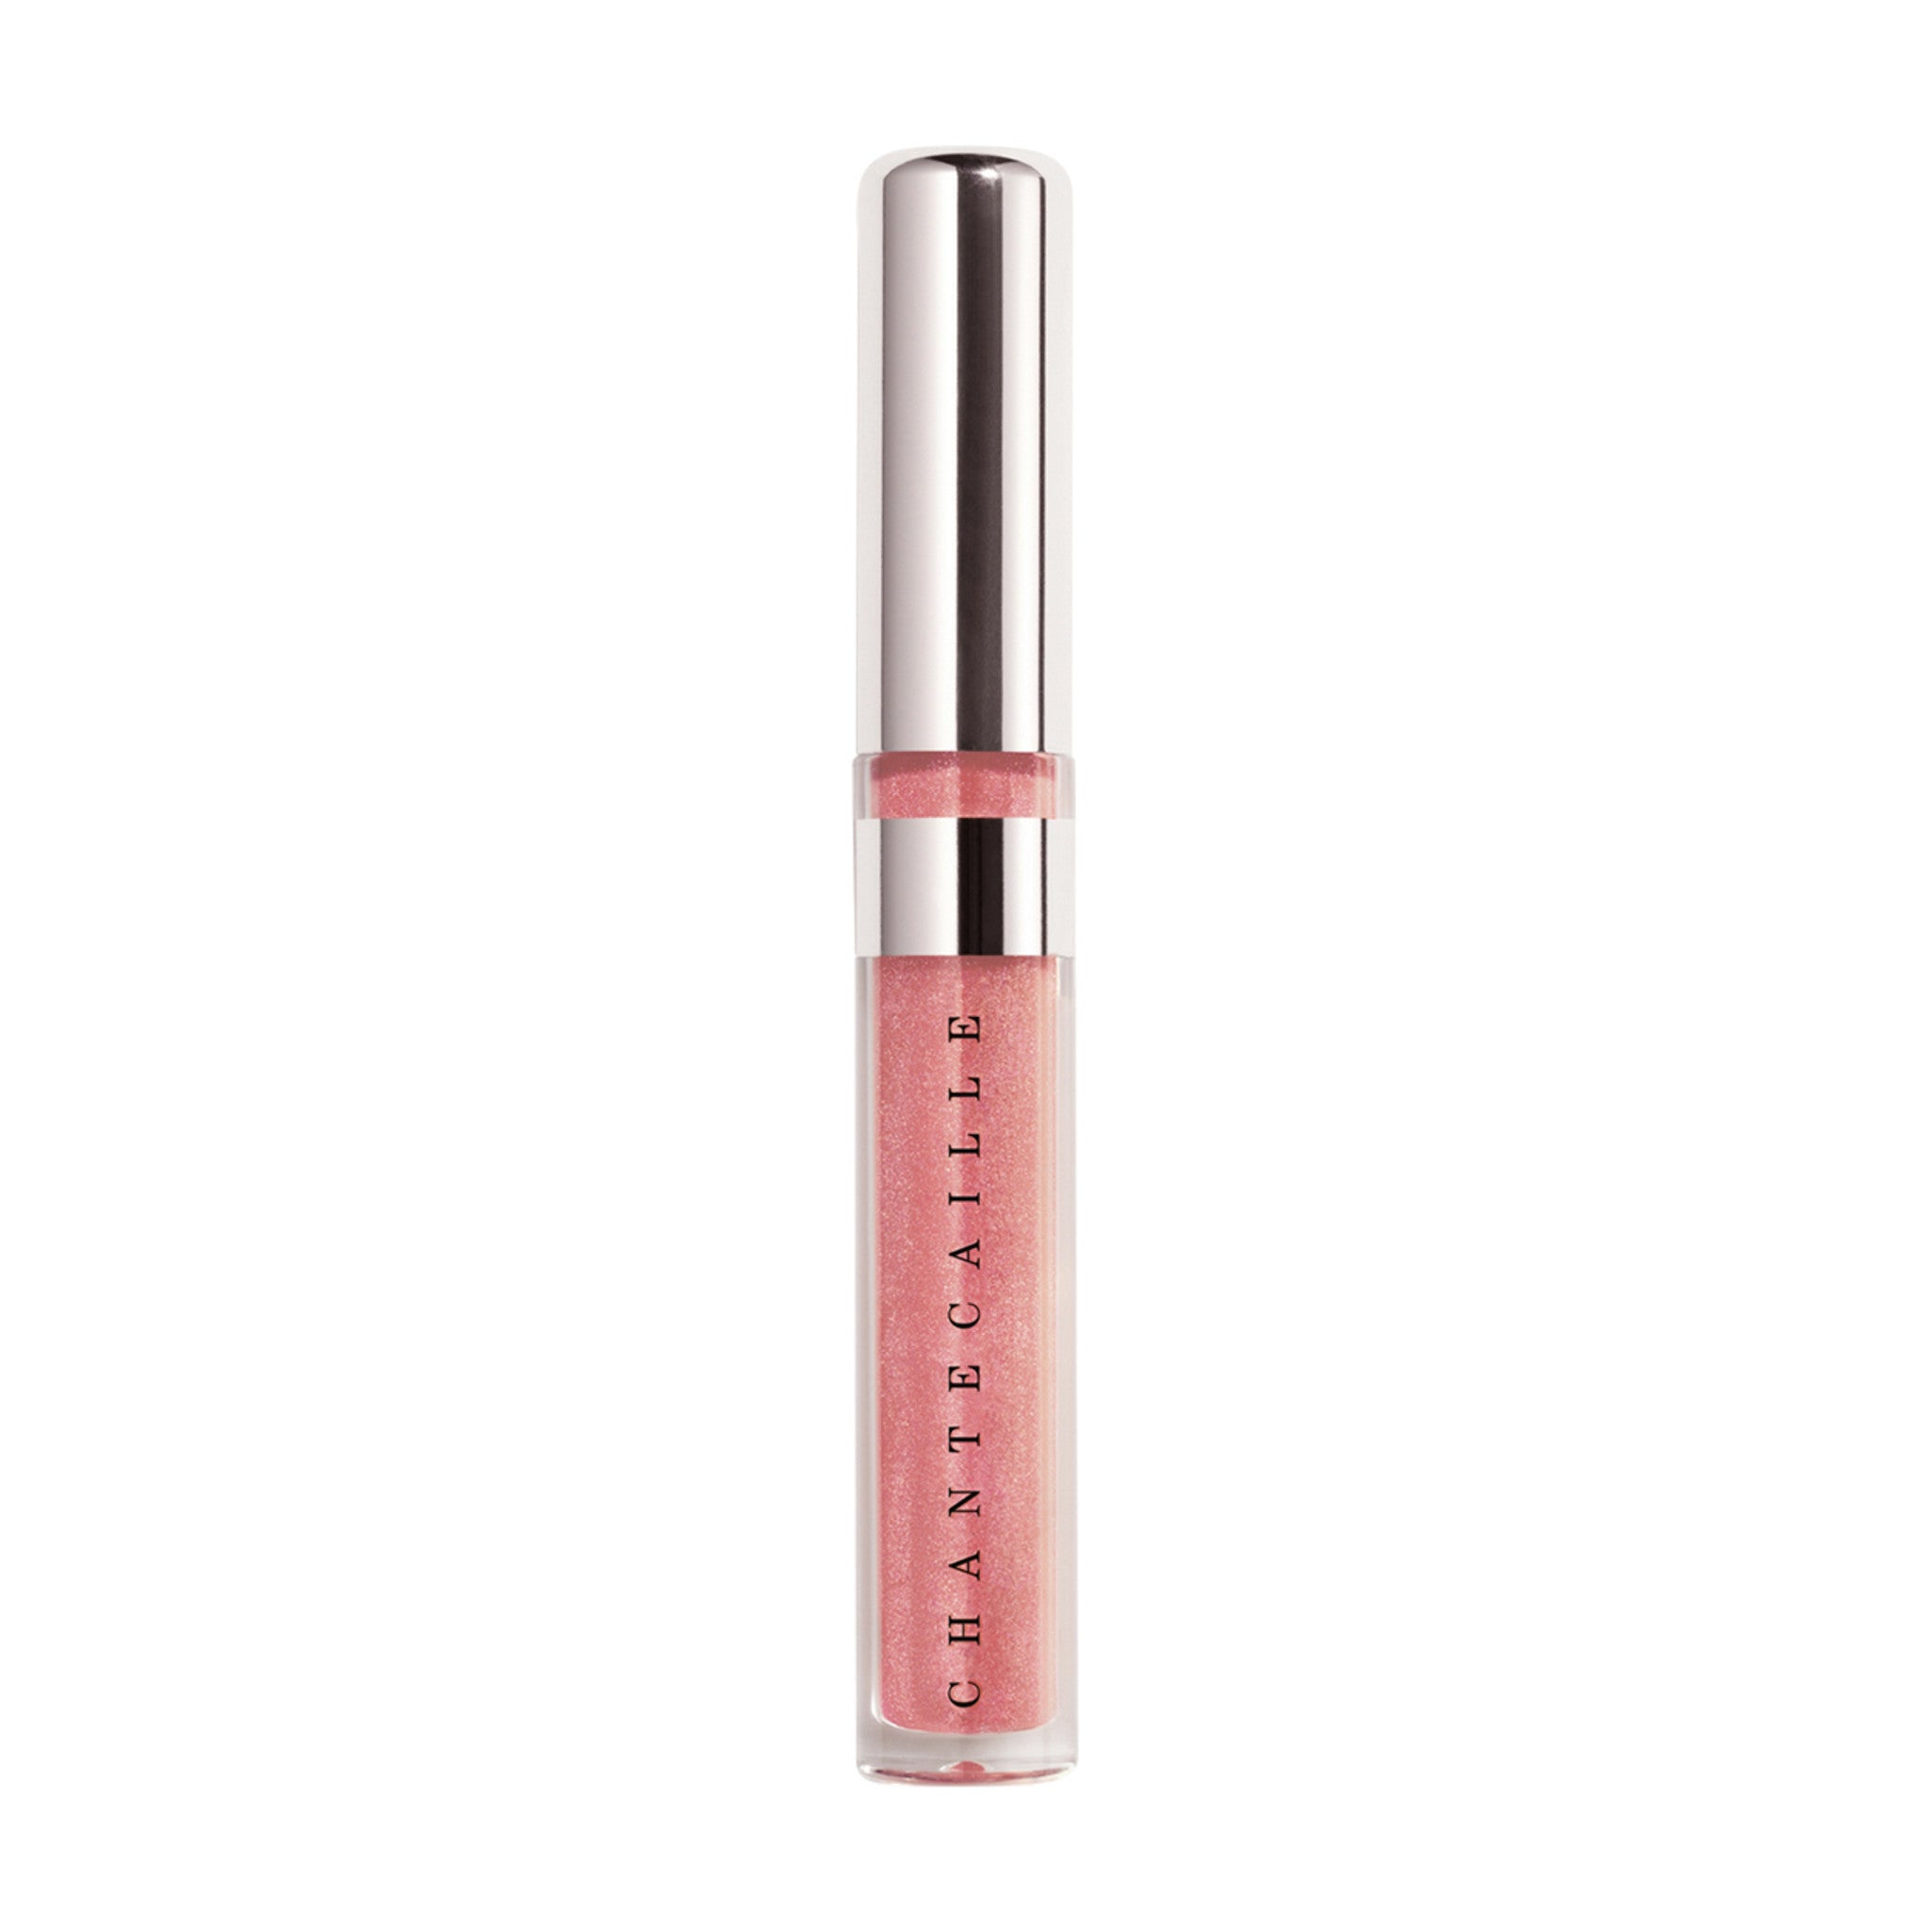 Chantecaille Brilliant Gloss Color/Shade variant: Pixie main image. This product is in the color coral